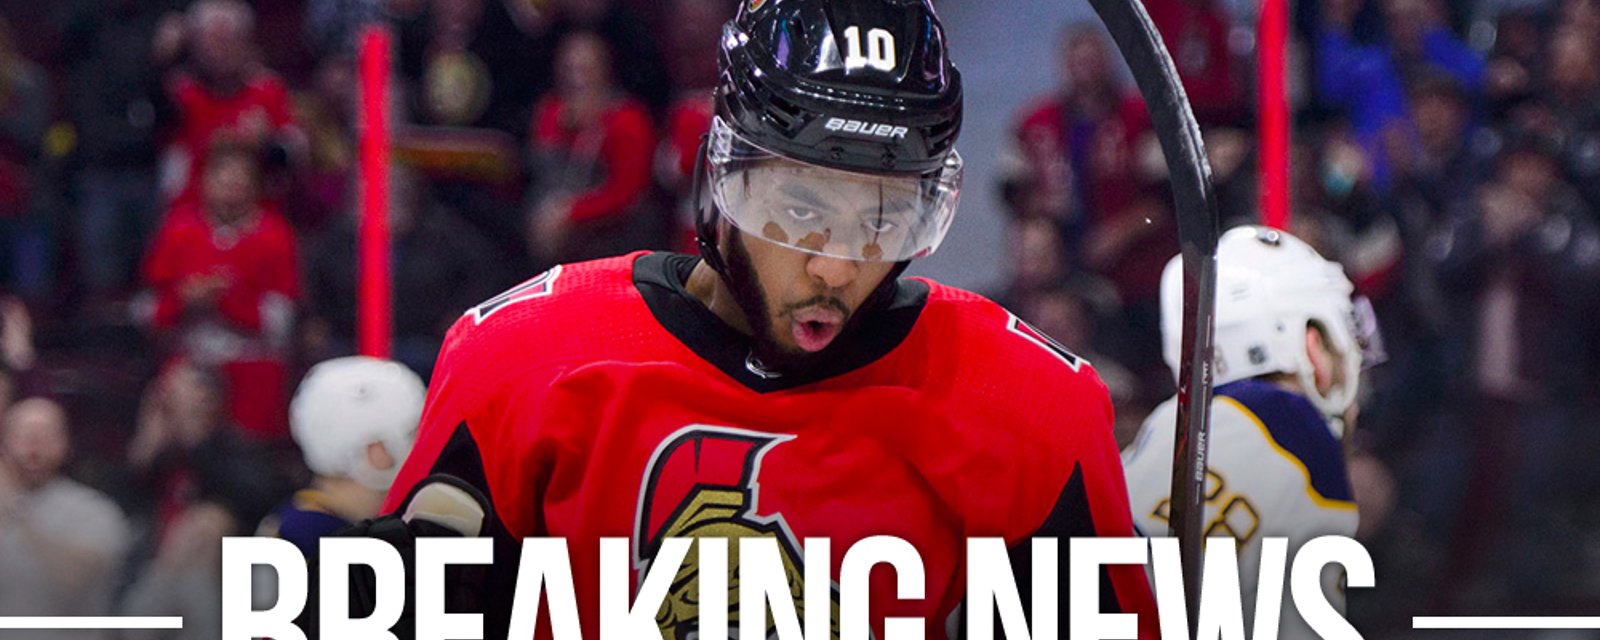 Free agent Anthony Duclair signs a one year deal